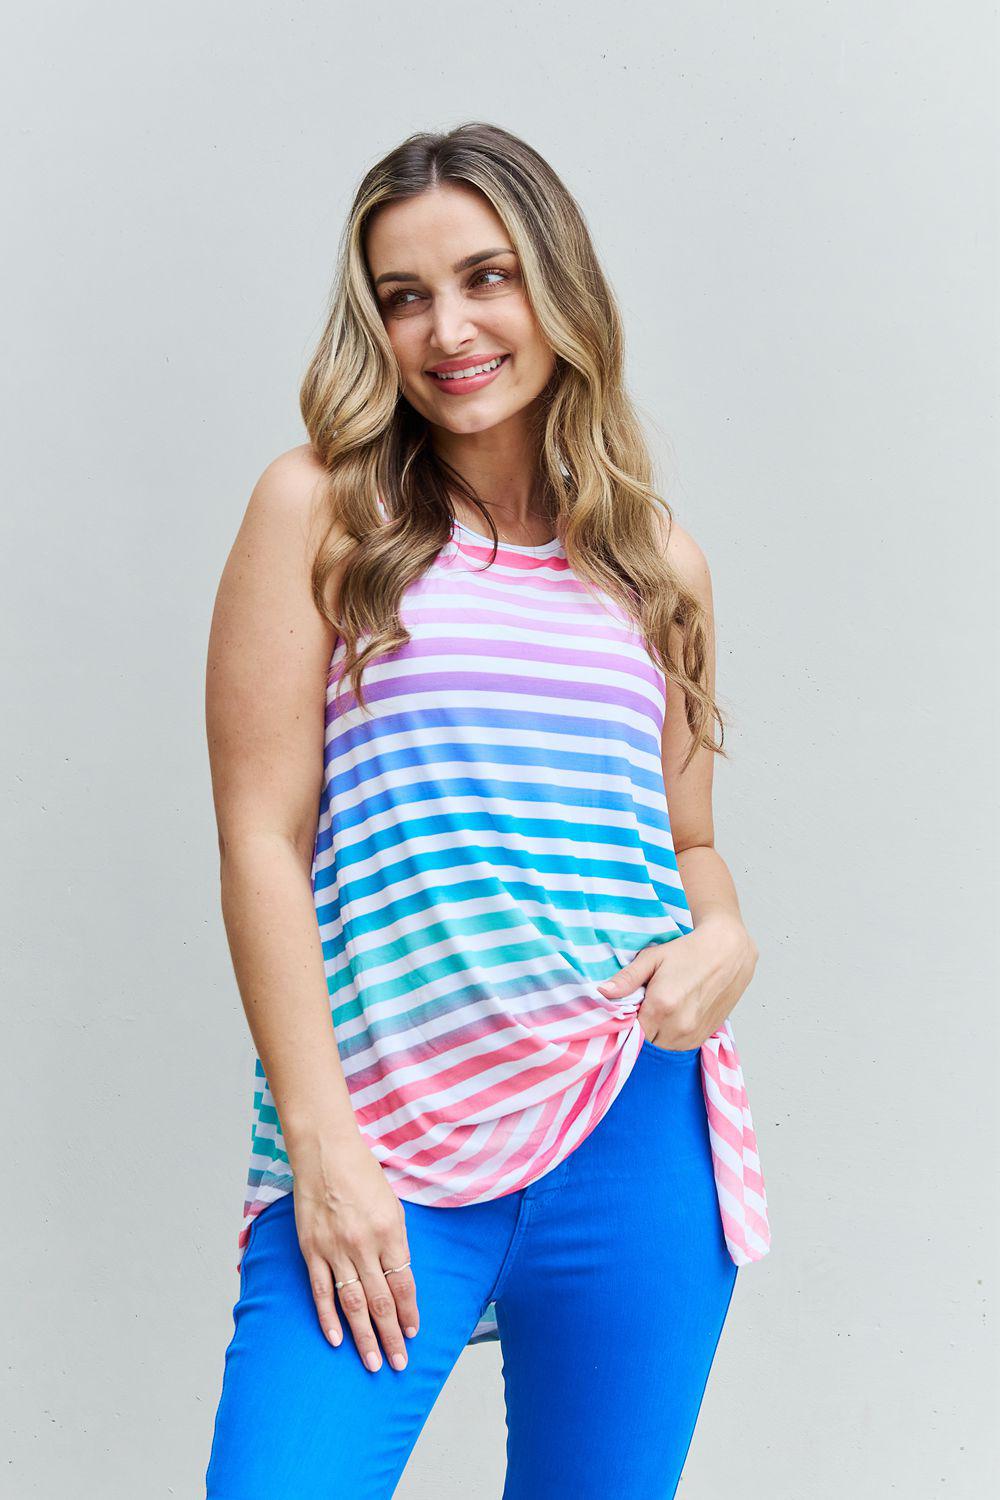 Heimish Love Yourself Full Size Multicolored Striped Sleeveless Round Neck Top BLUE ZONE PLANET